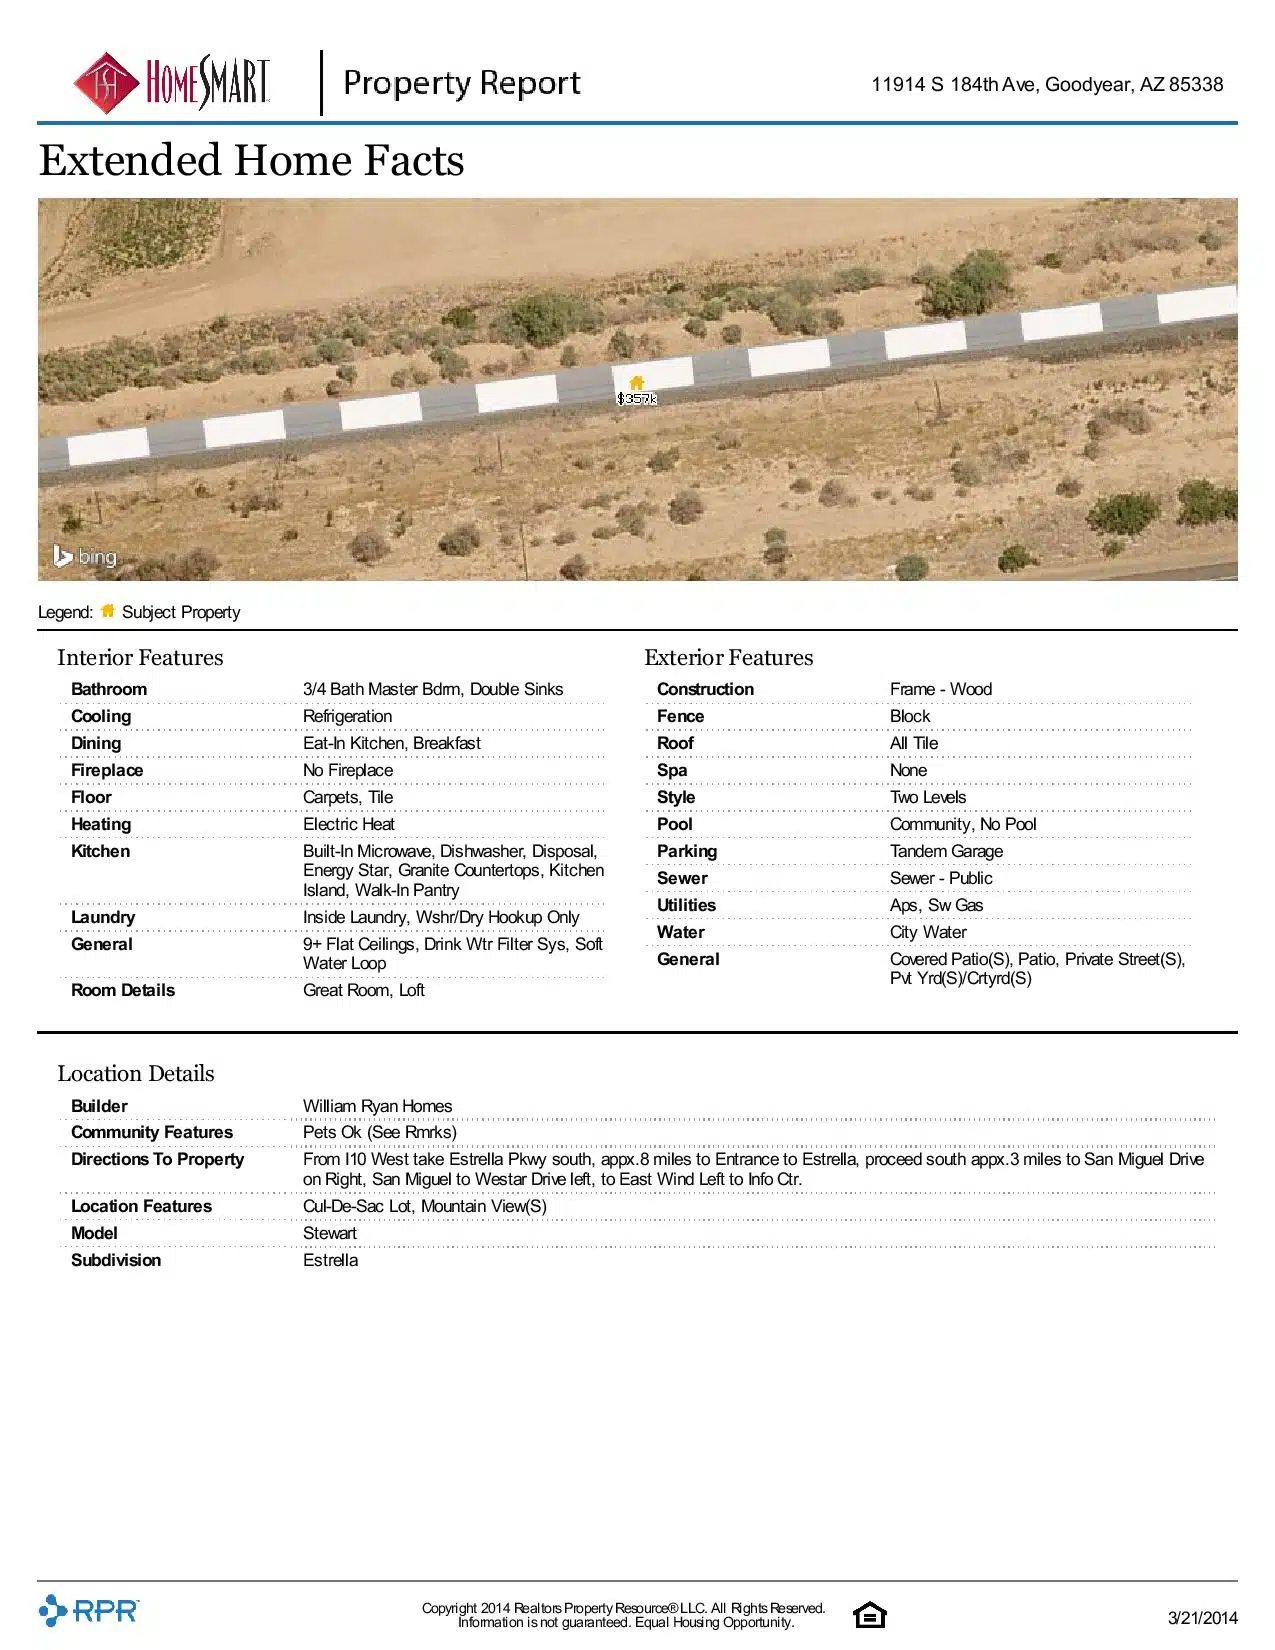 11914-S-184th-Ave-Goodyear-AZ-85338-page-004